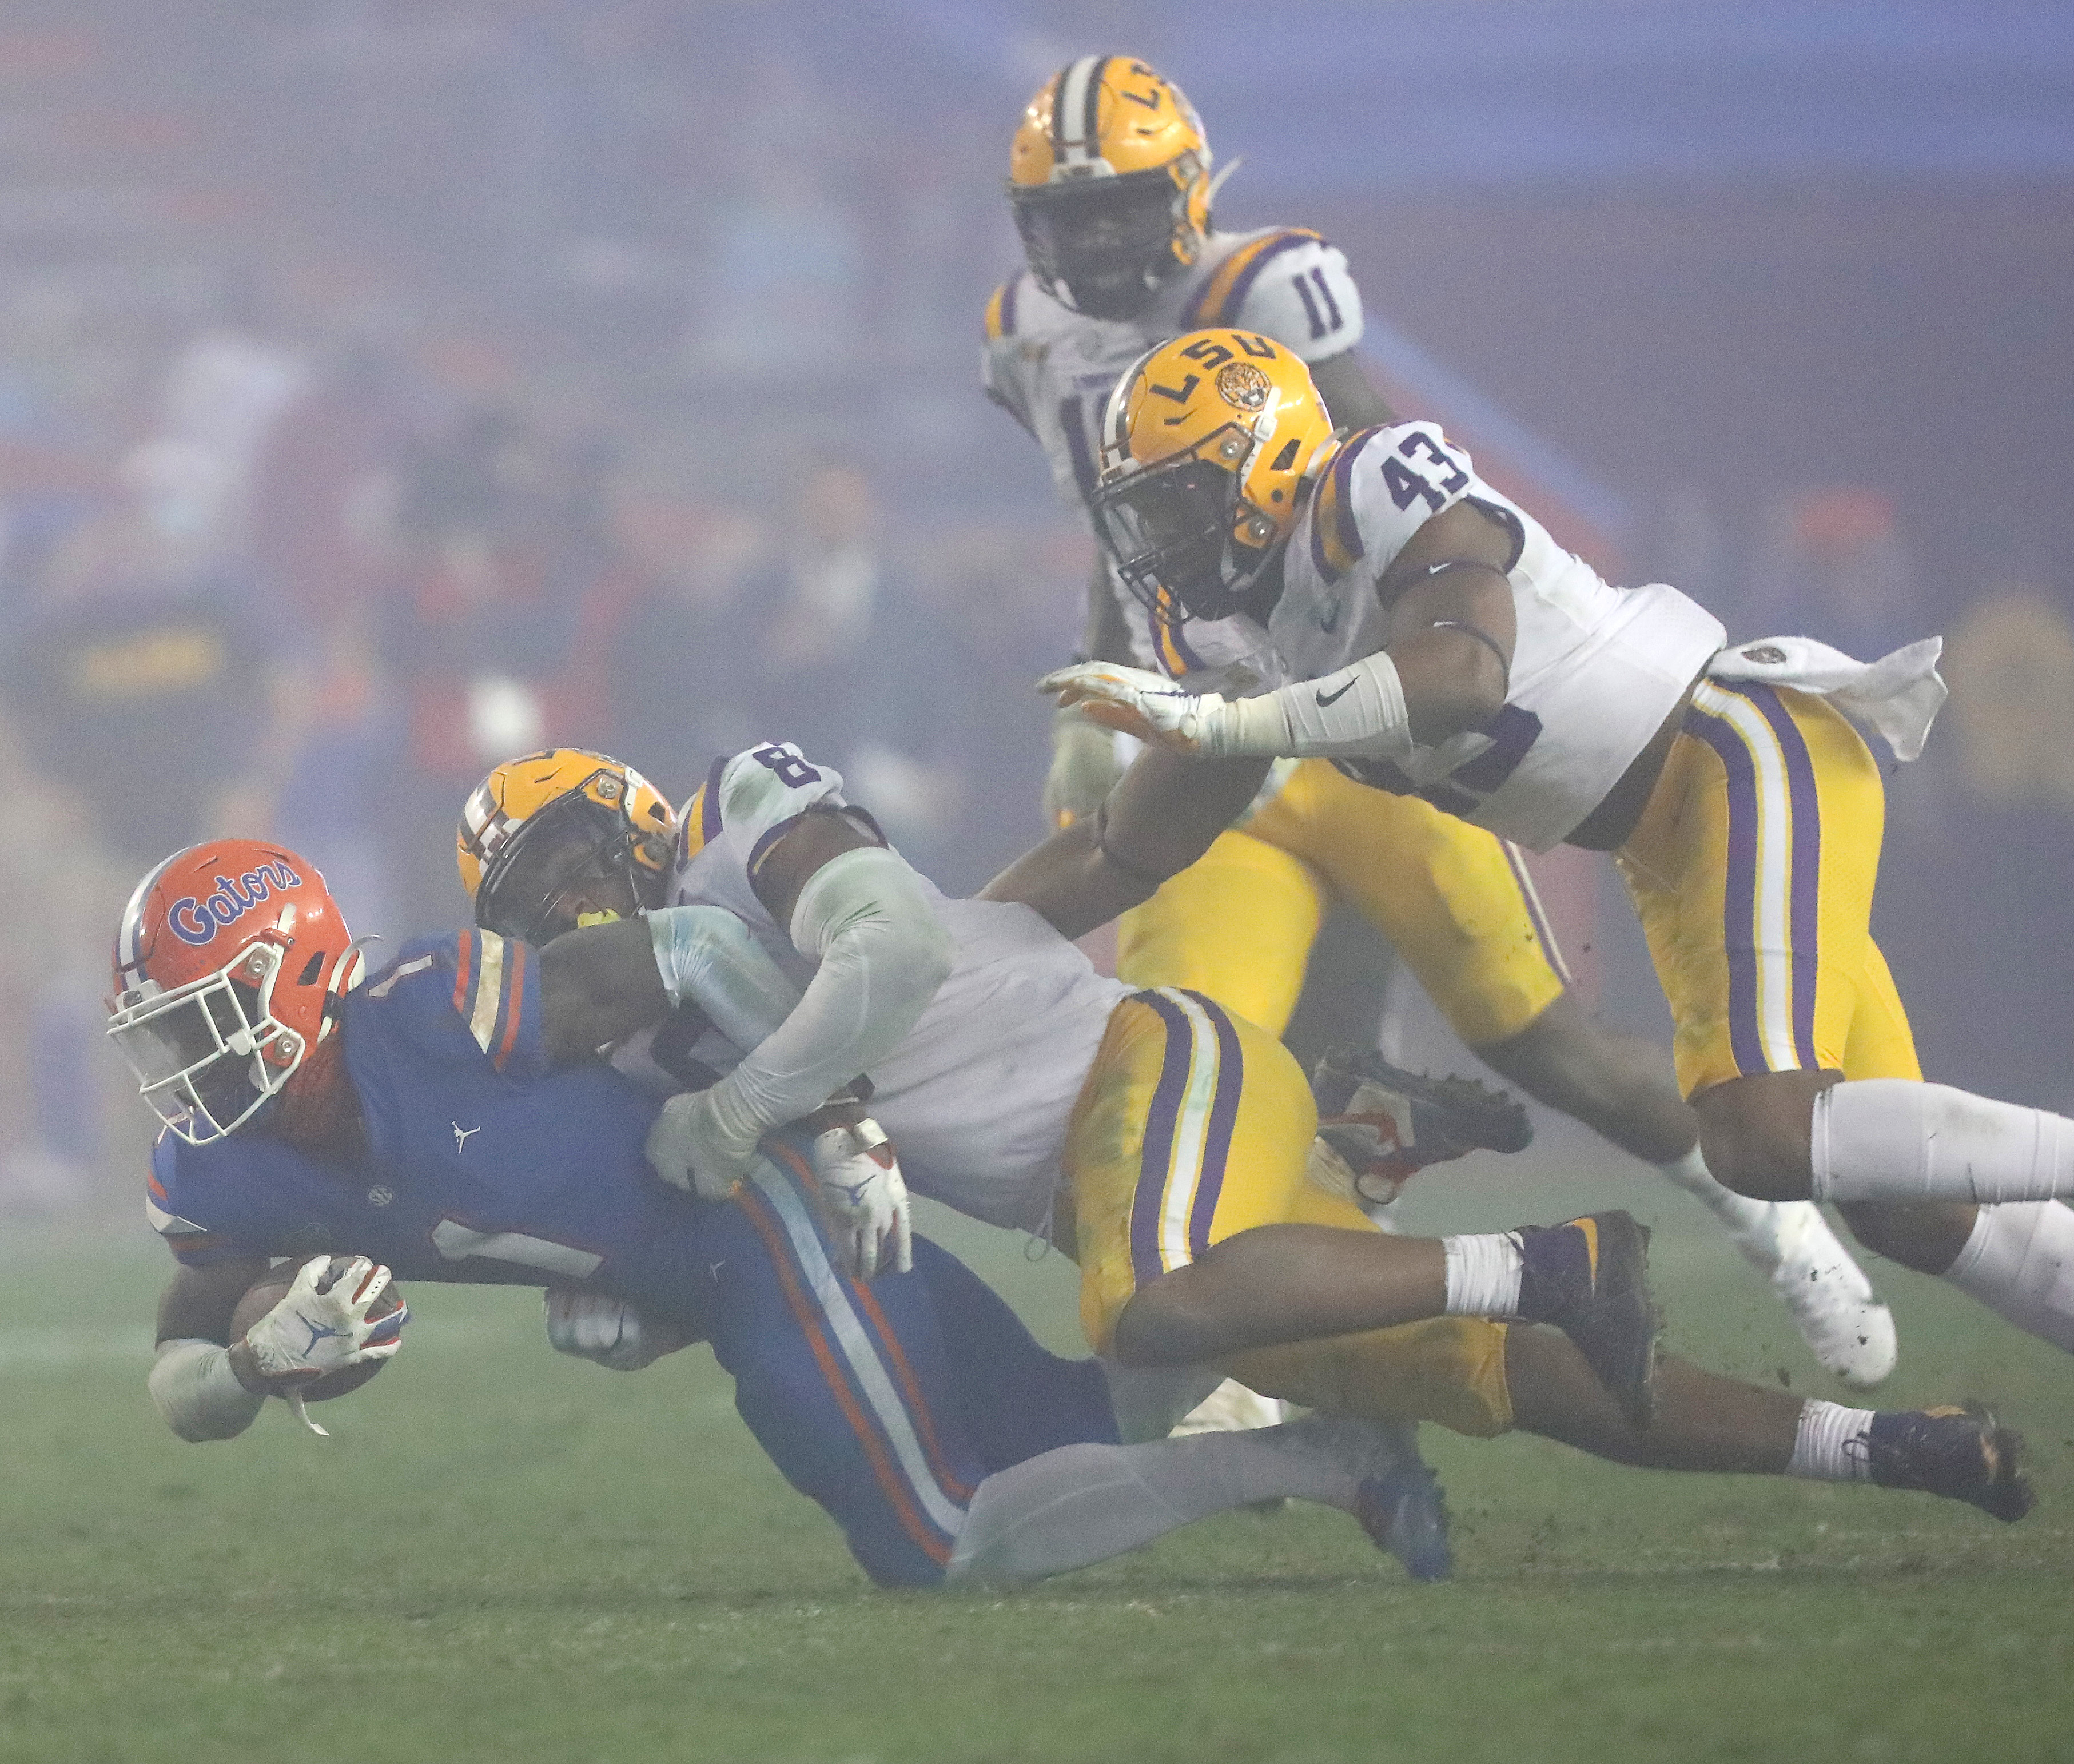 How to Watch/Listen to LSU Football vs No. 20 Florida Sports